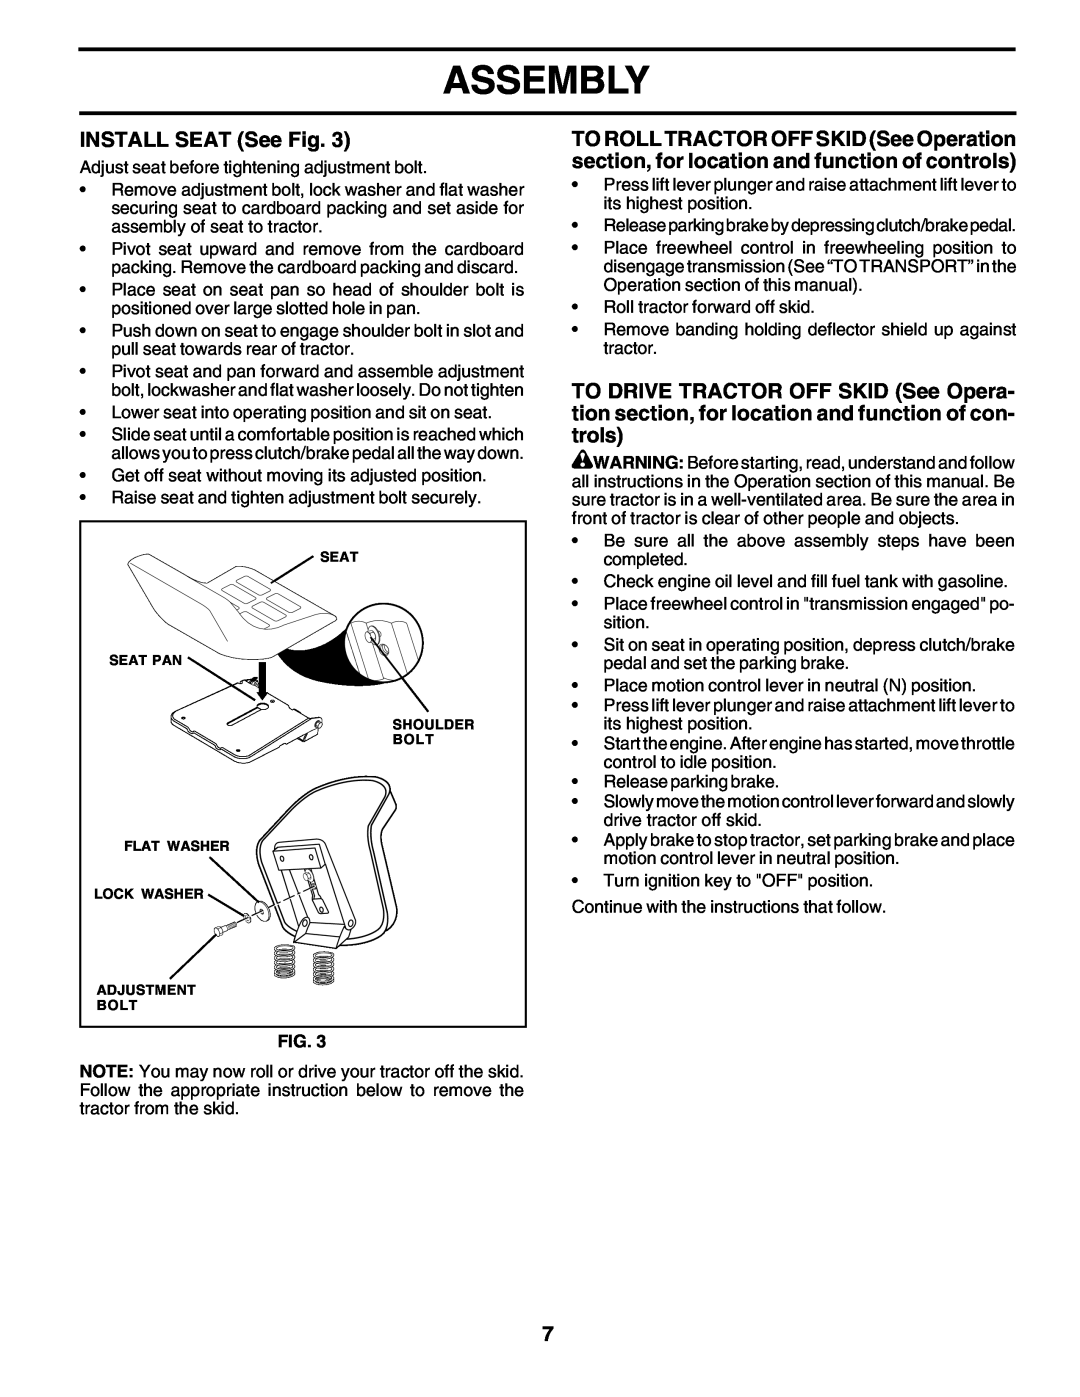 Weed Eater S165H42D owner manual Assembly, INSTALL SEAT See Fig 